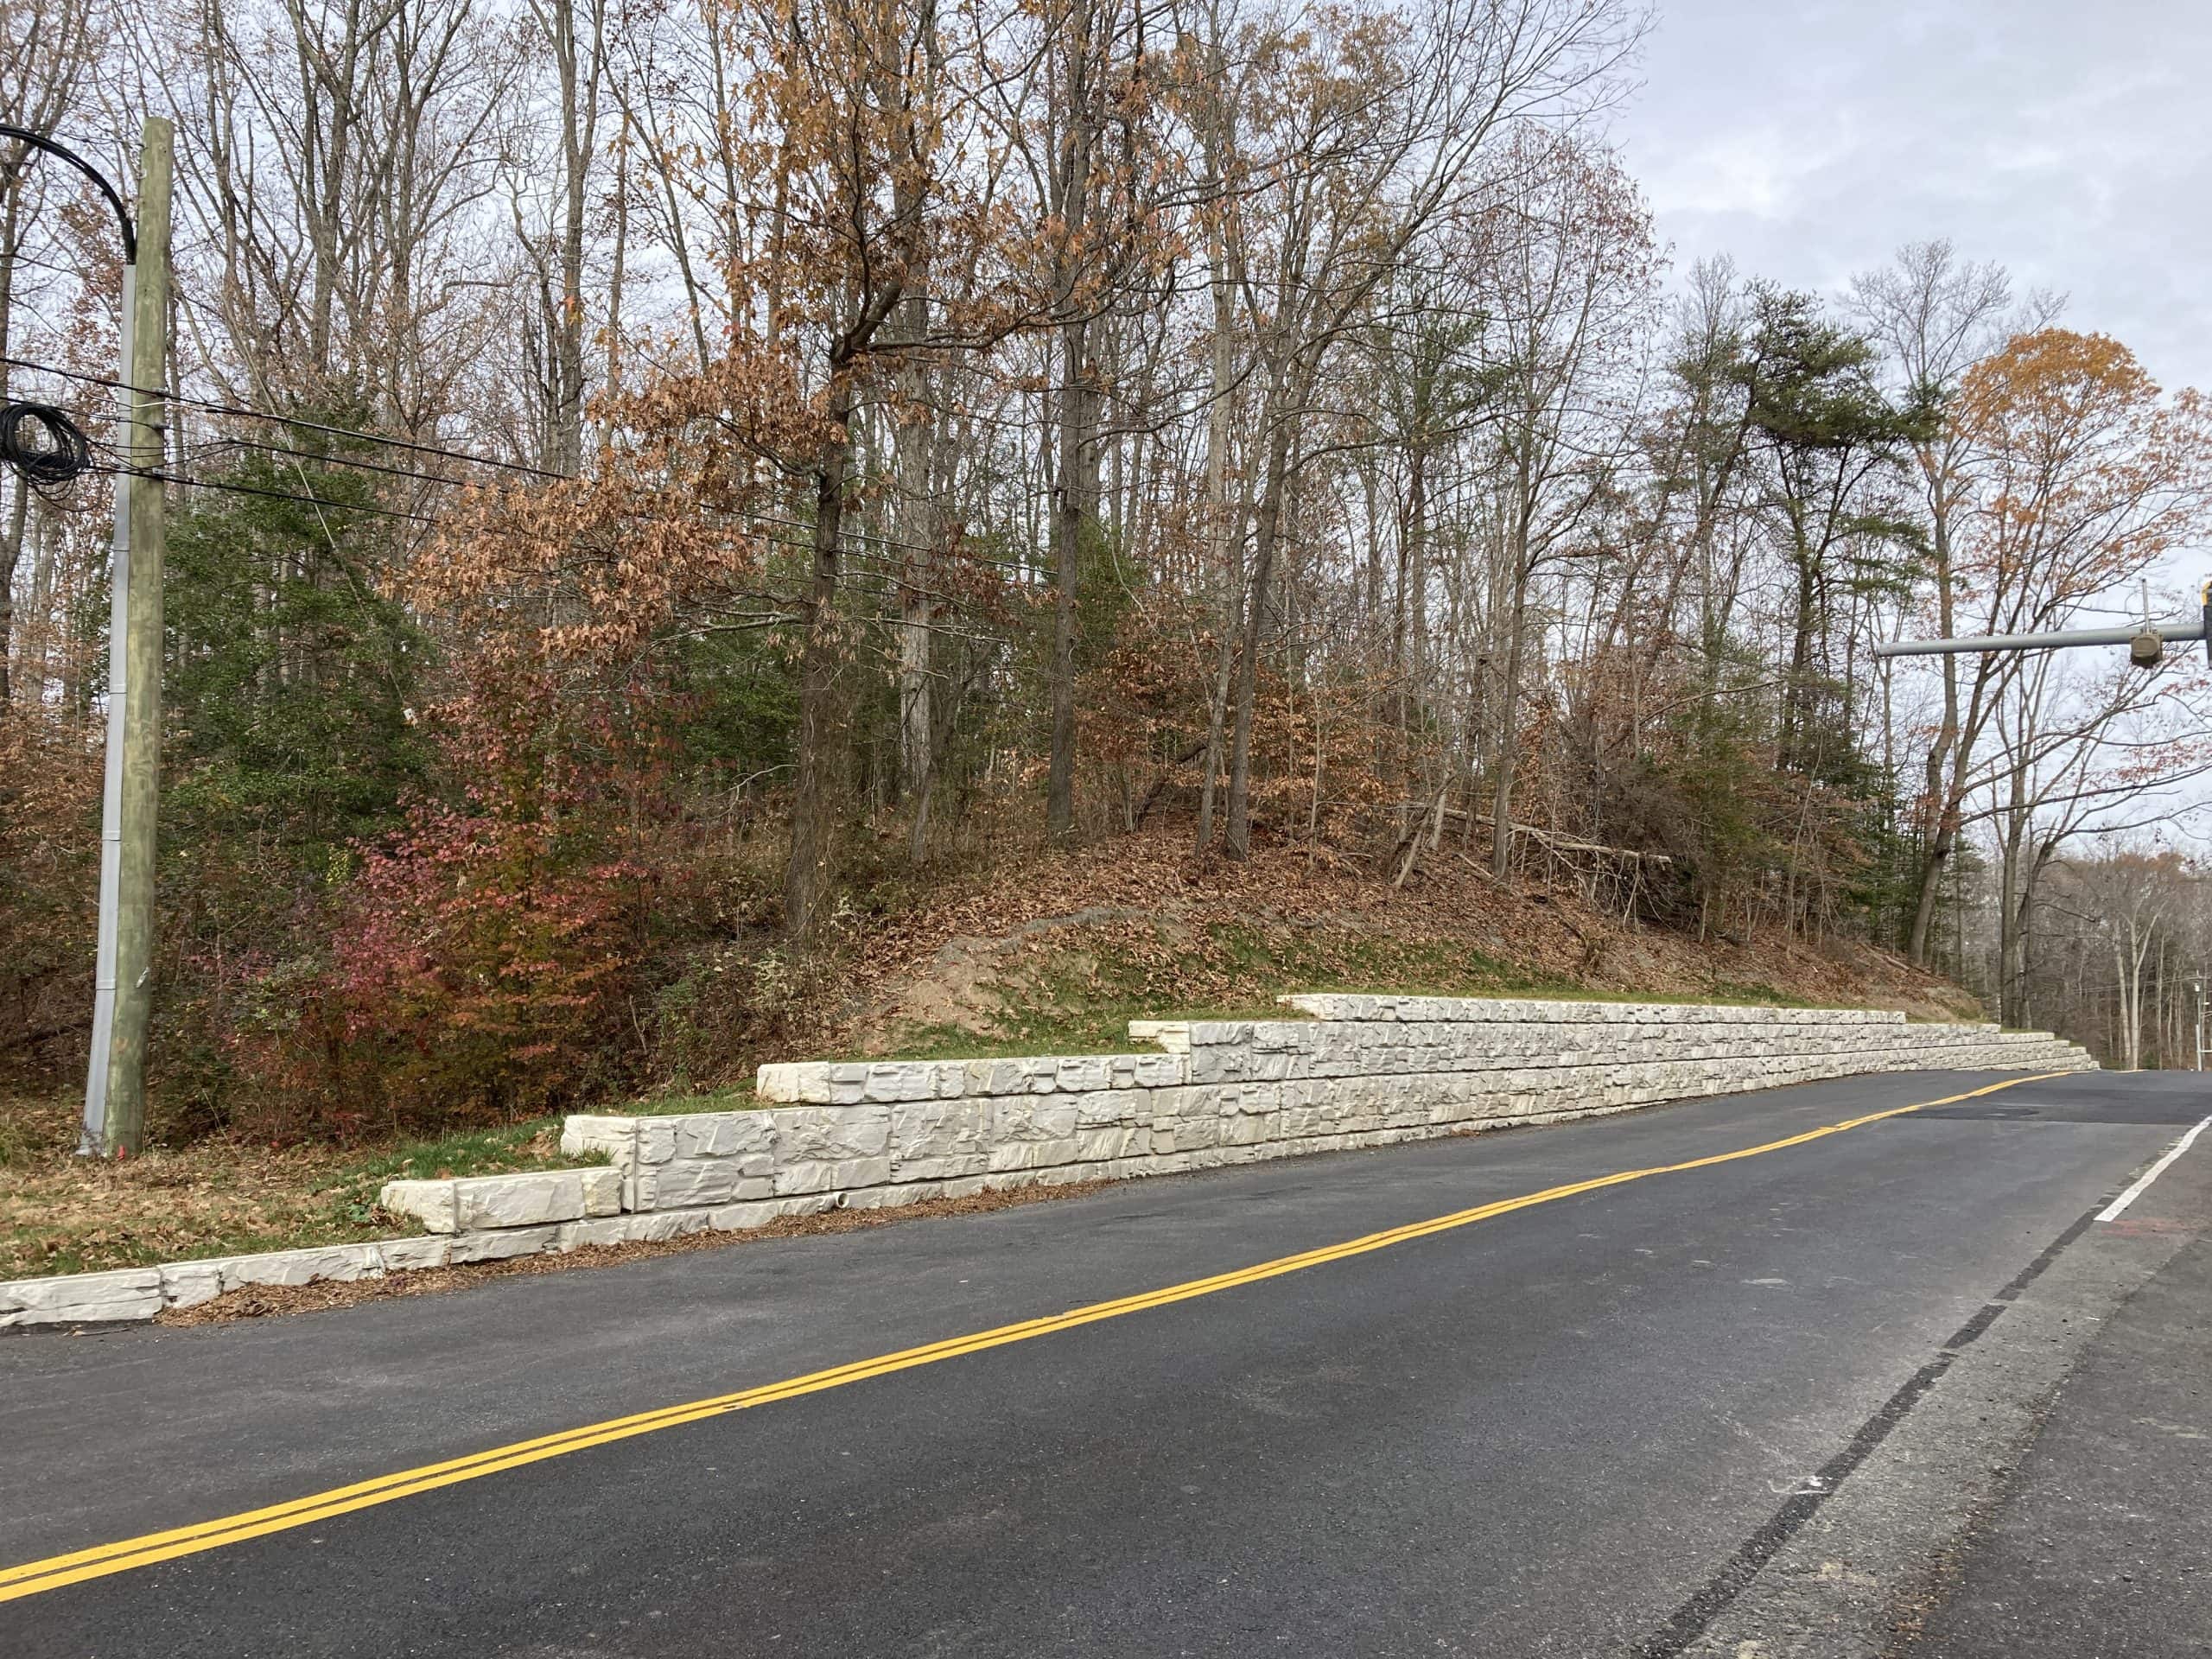 Retaining wall protects roadway with MagnumStone blocks.